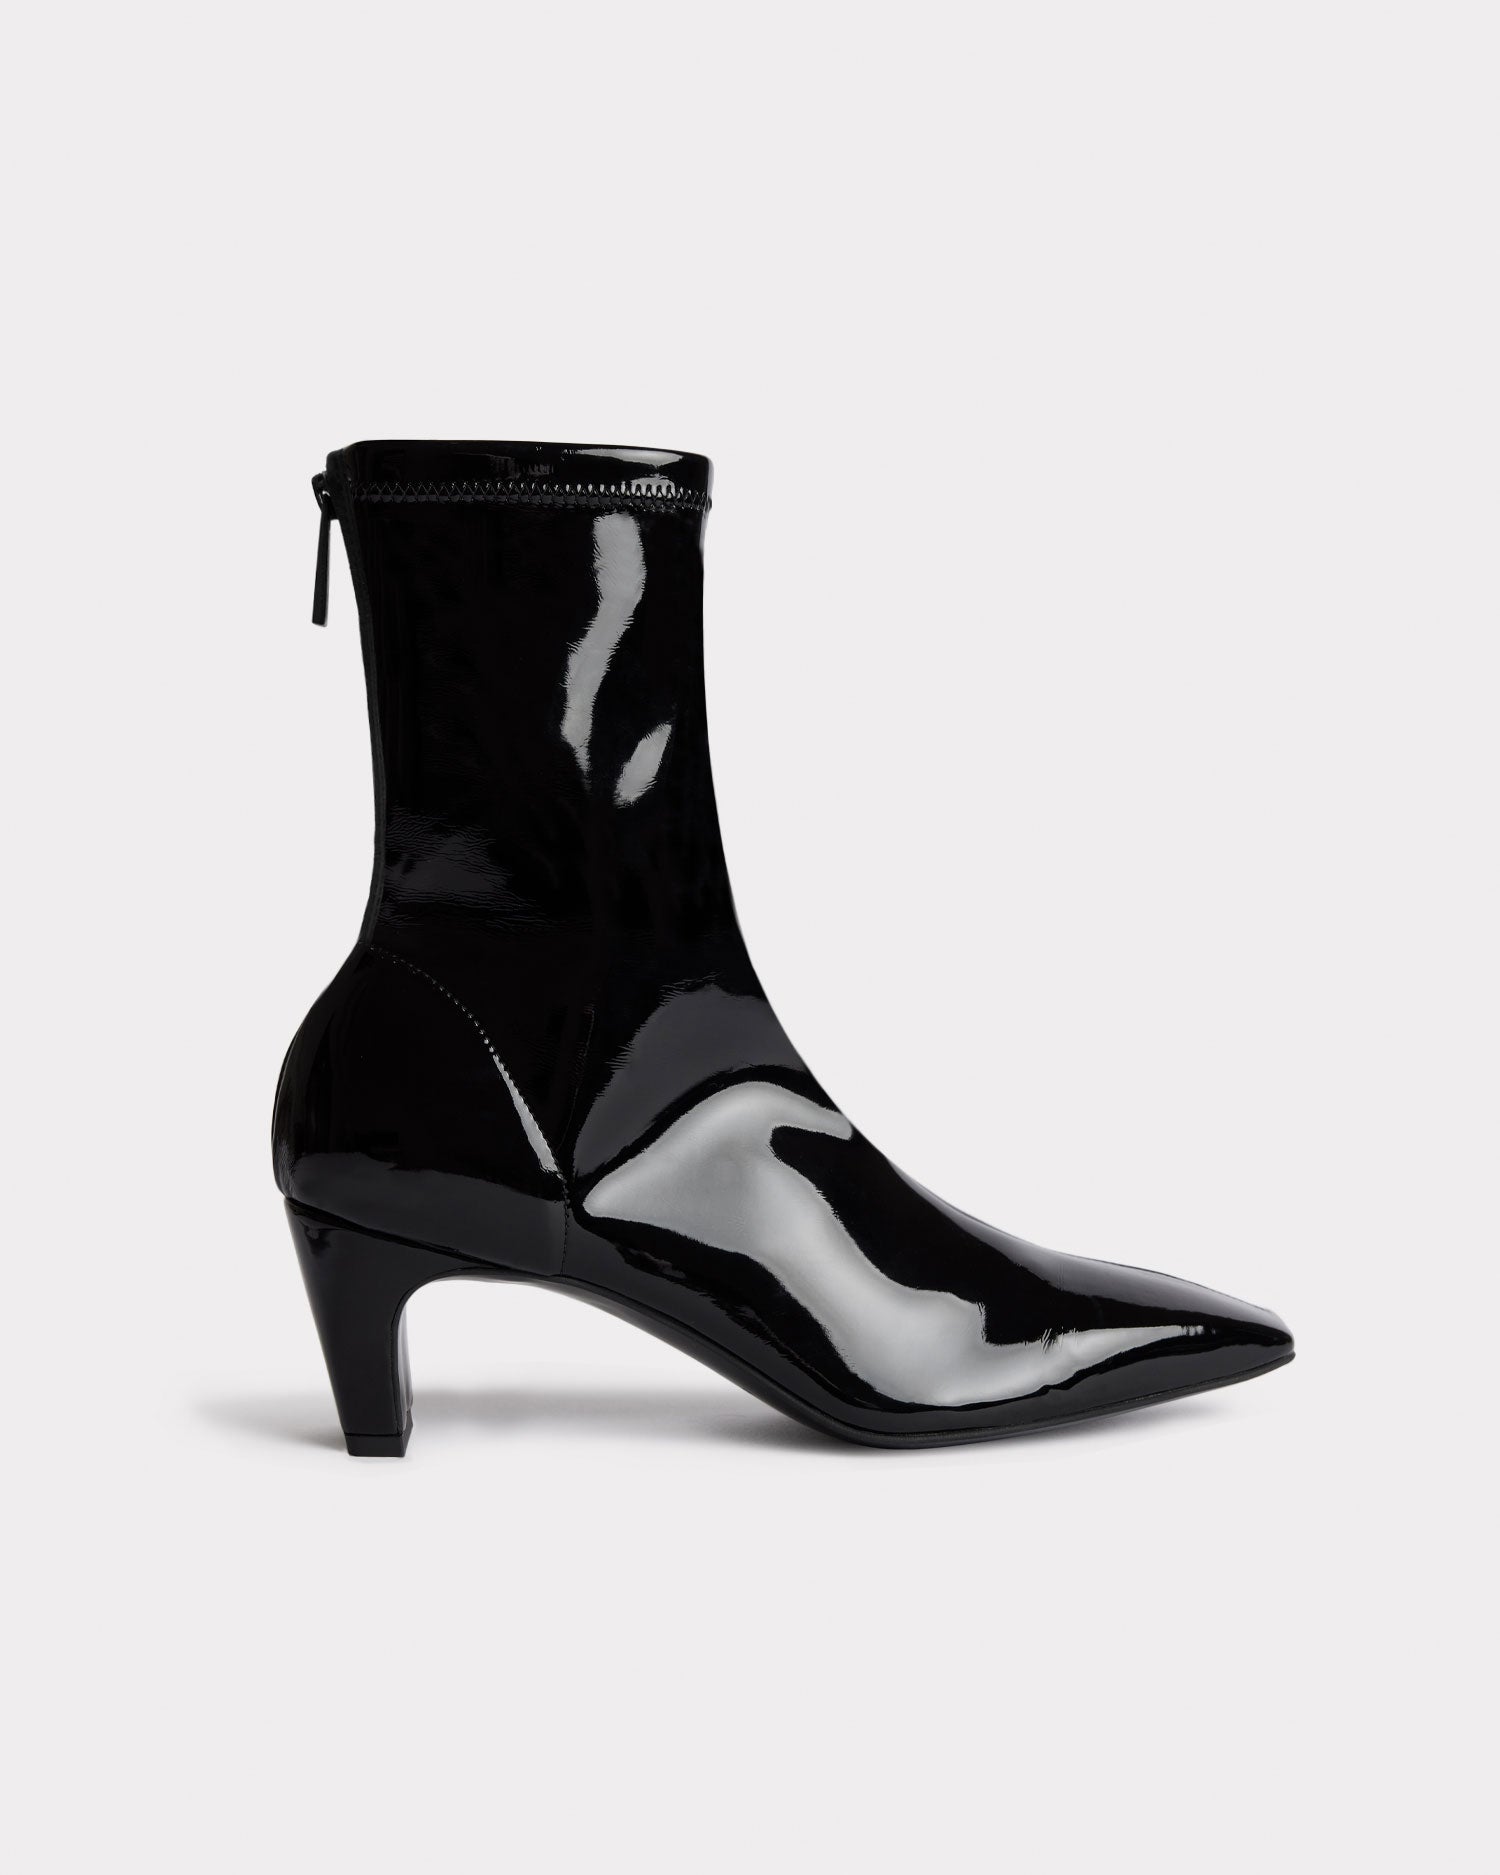 quiet luxury black patent leather ankle boot